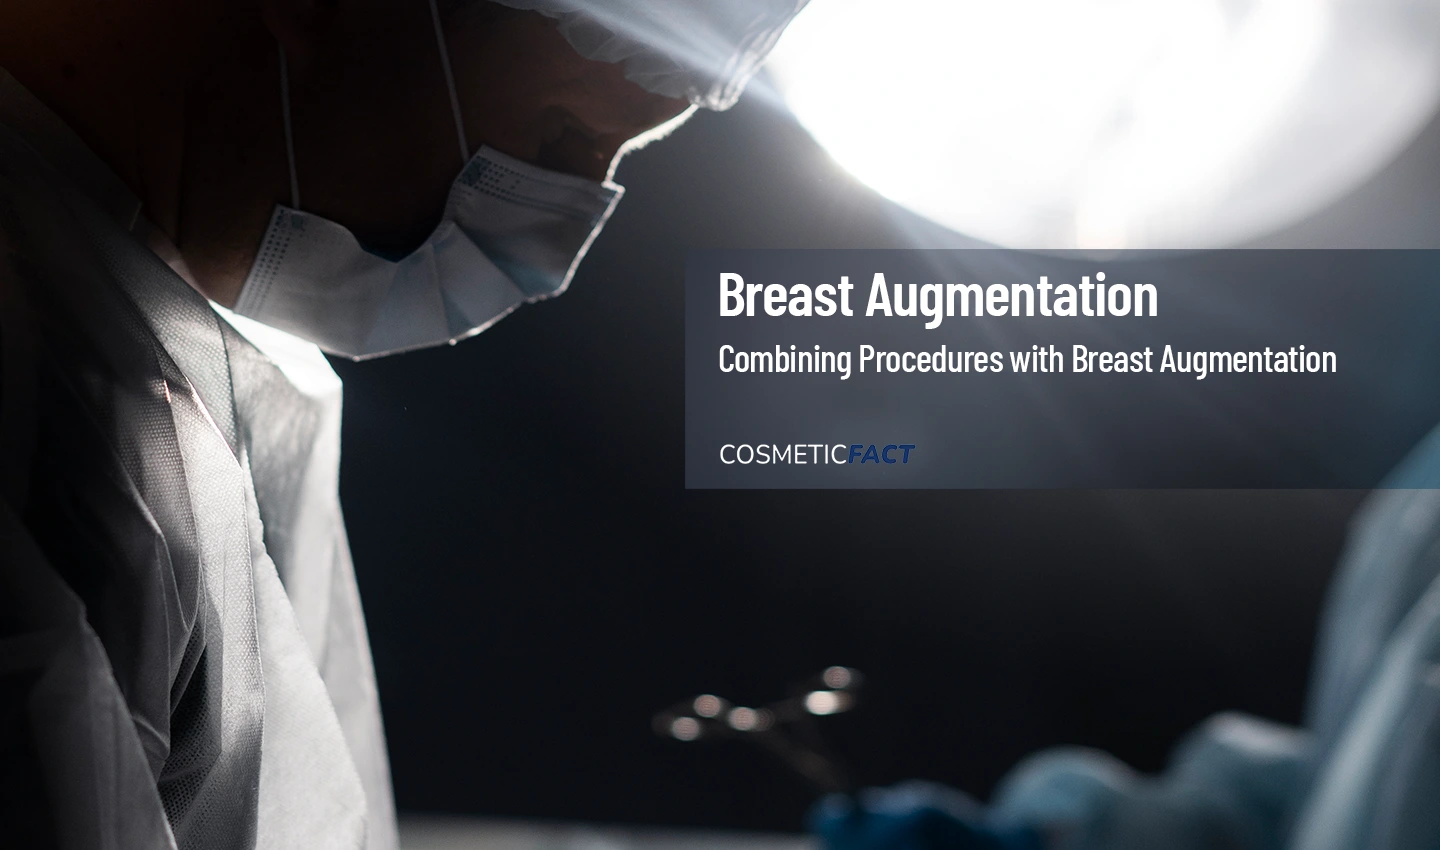 Skilled doctor performing breast augmentation as part of the ultimate makeover in a modern surgery room.